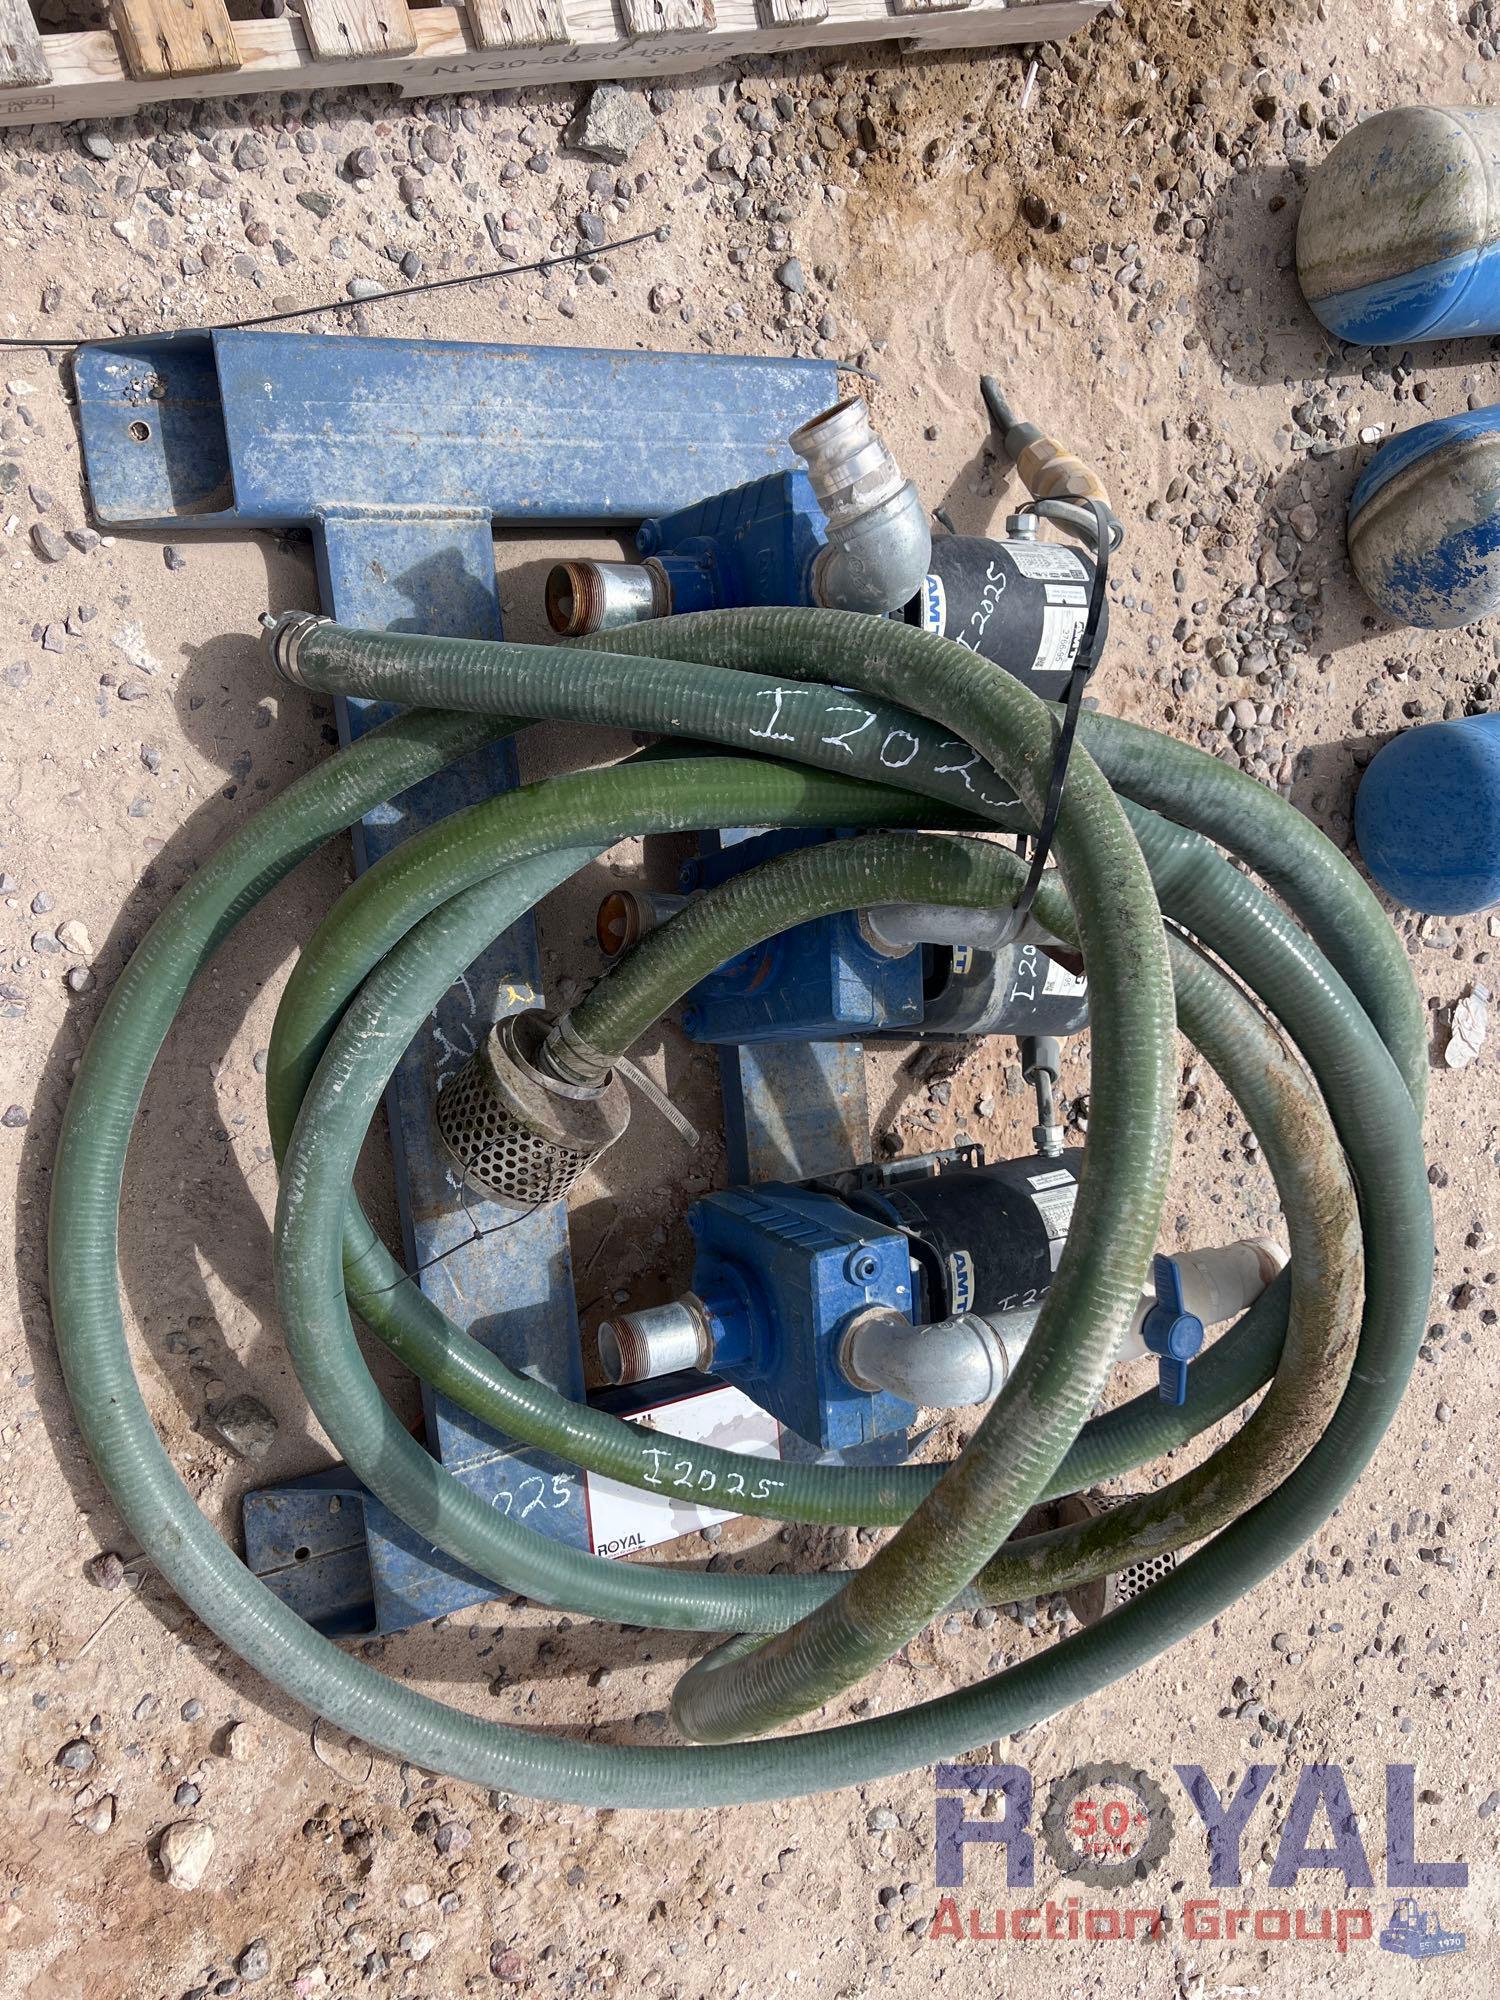 Three 2in Electric Water Pumps with Two 2 inch Suction Hoses